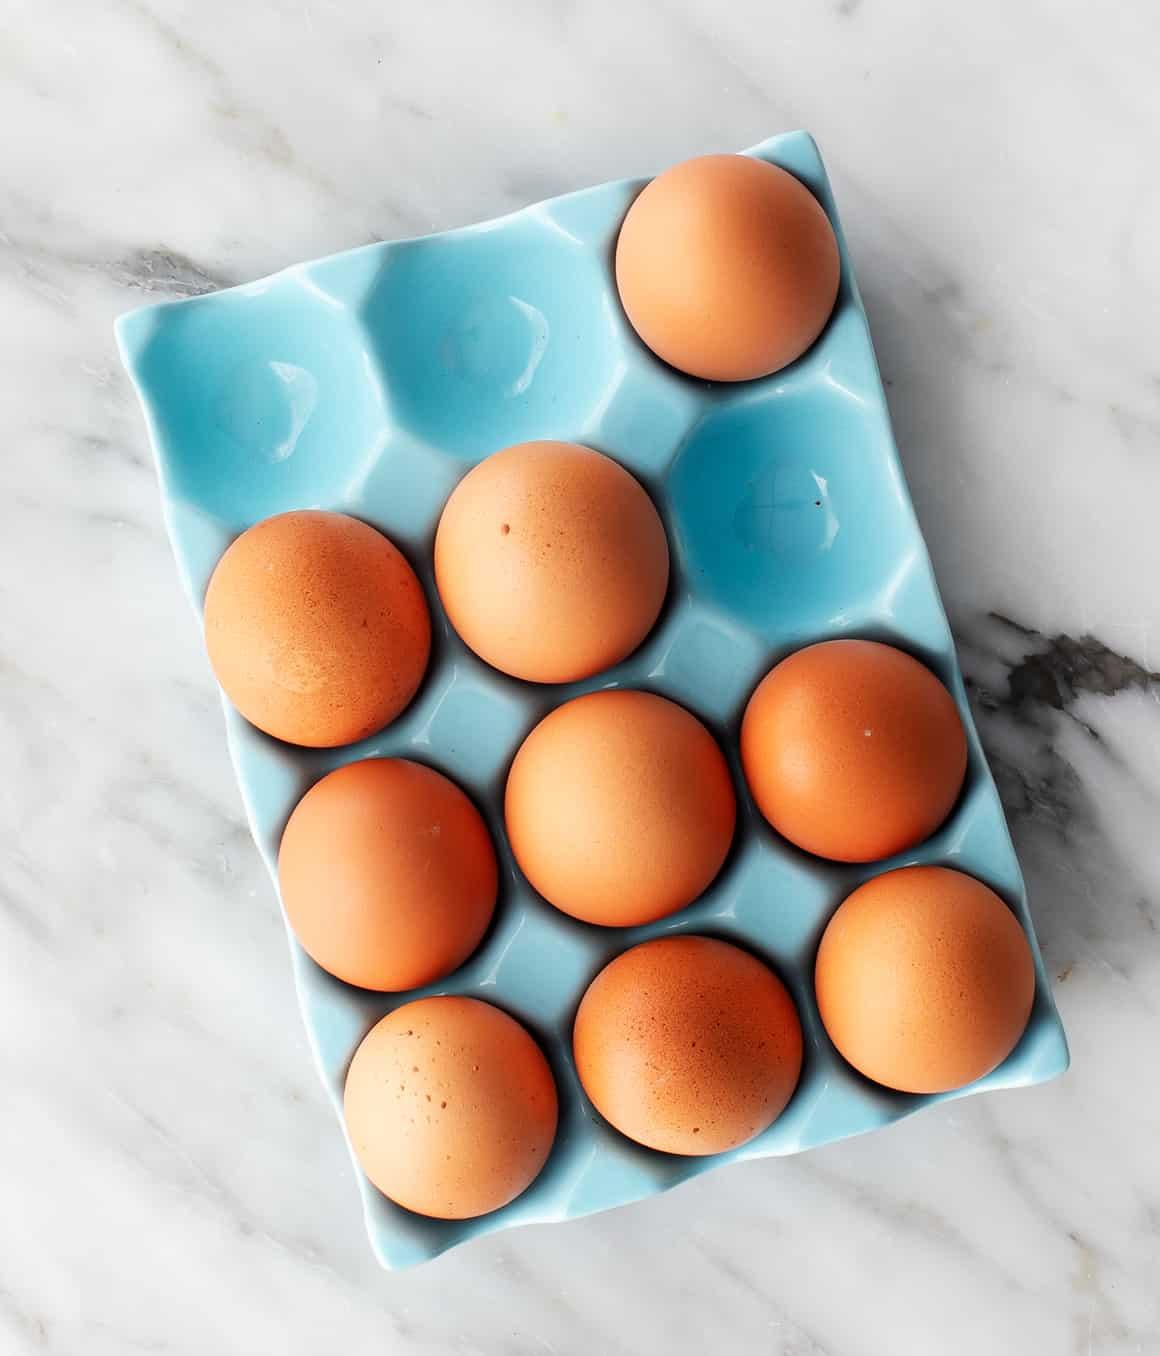 Eggs in a tray